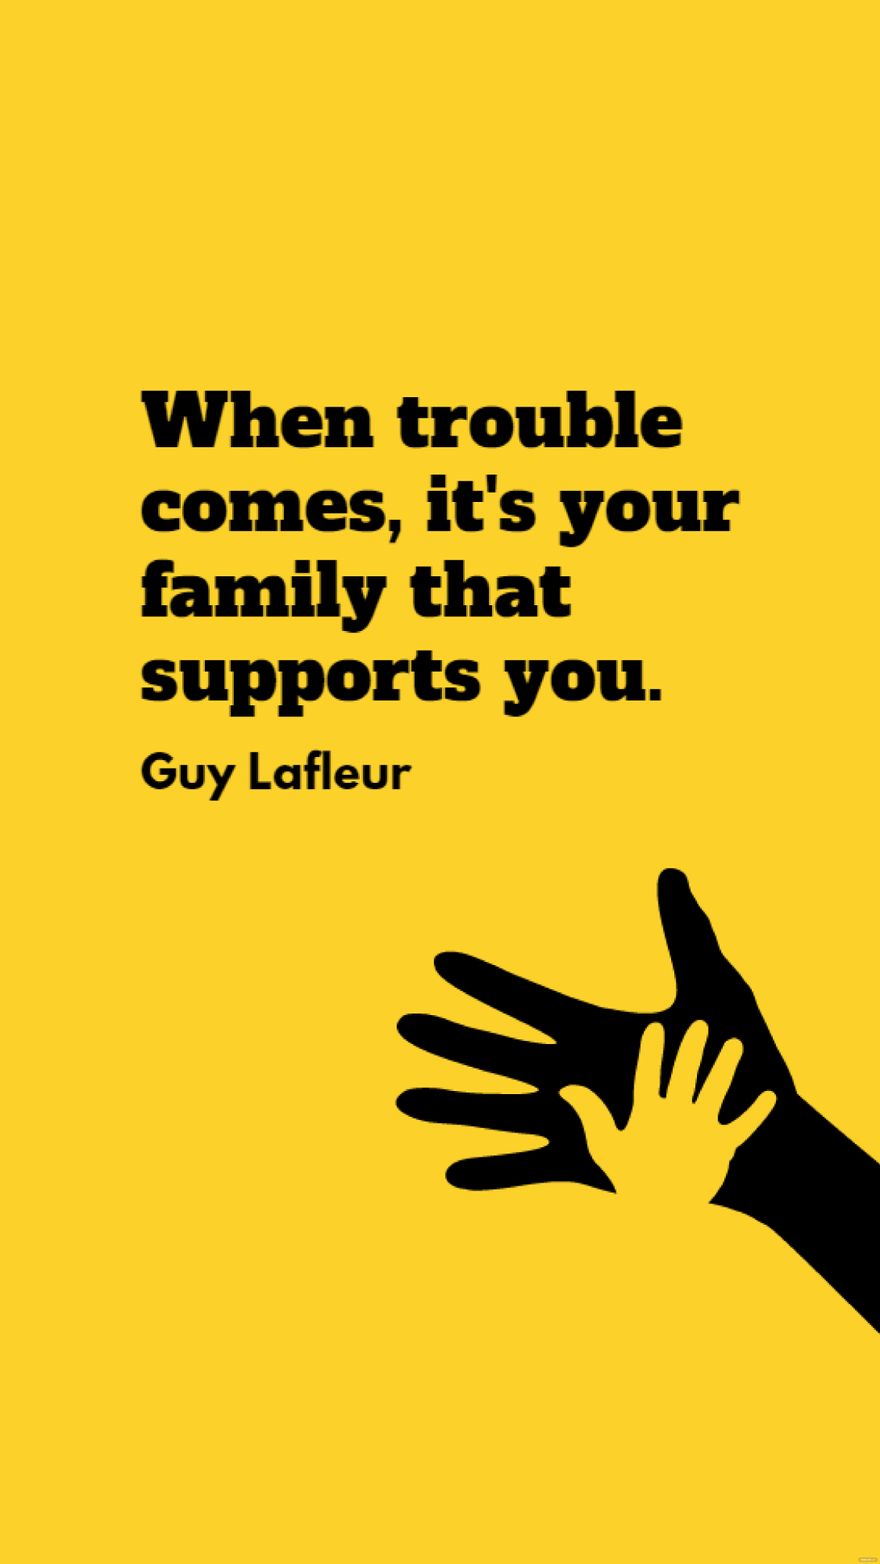 Free Guy Lafleur - When trouble comes, it's your family that supports you.